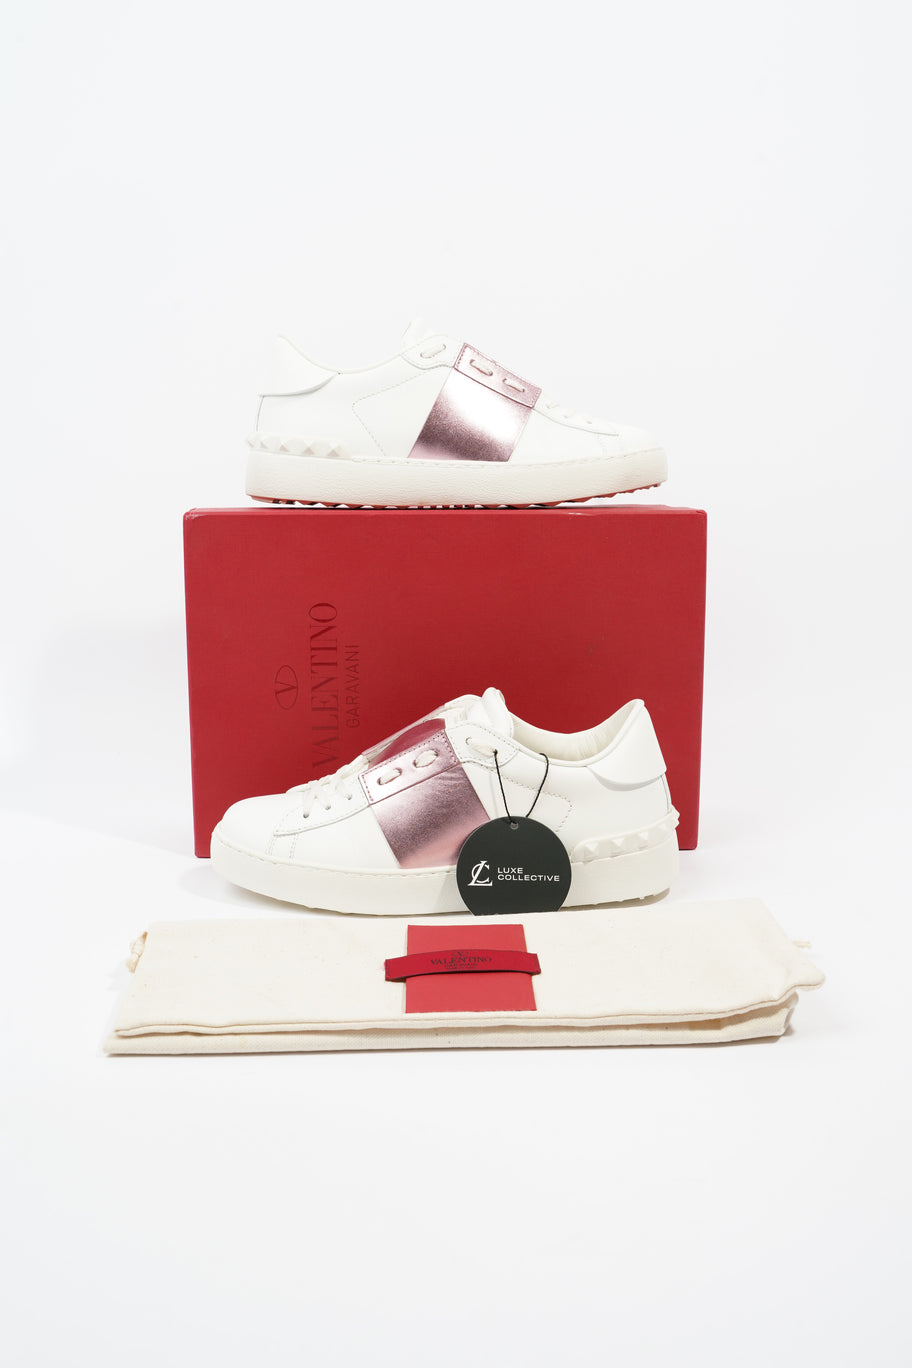 Open Sneakers White / Pink Leather EU 37.5 UK 4.5 Image 12